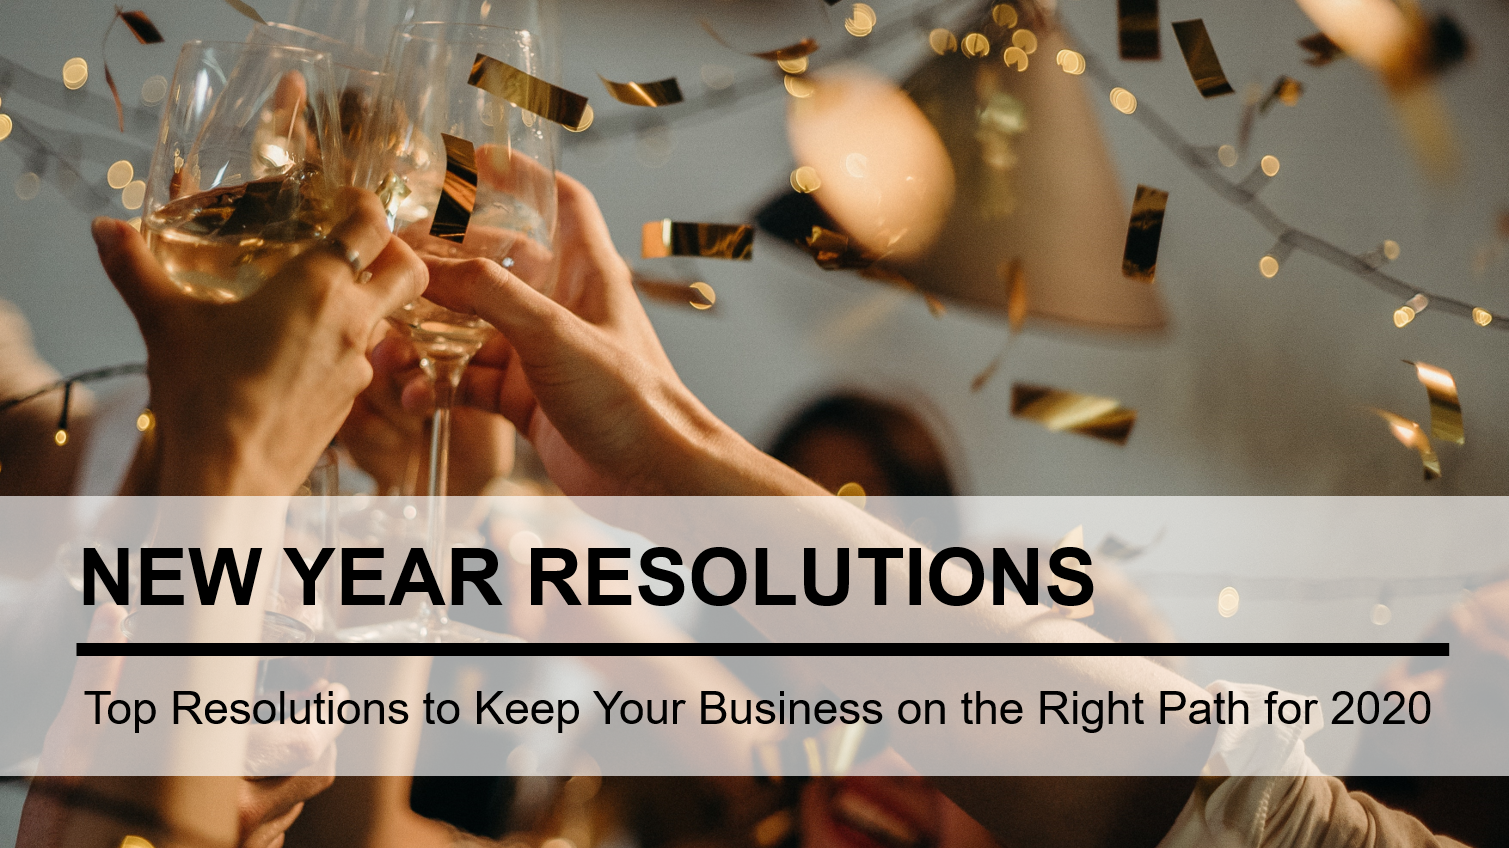 New Year Resolutions for Your Beverage Business